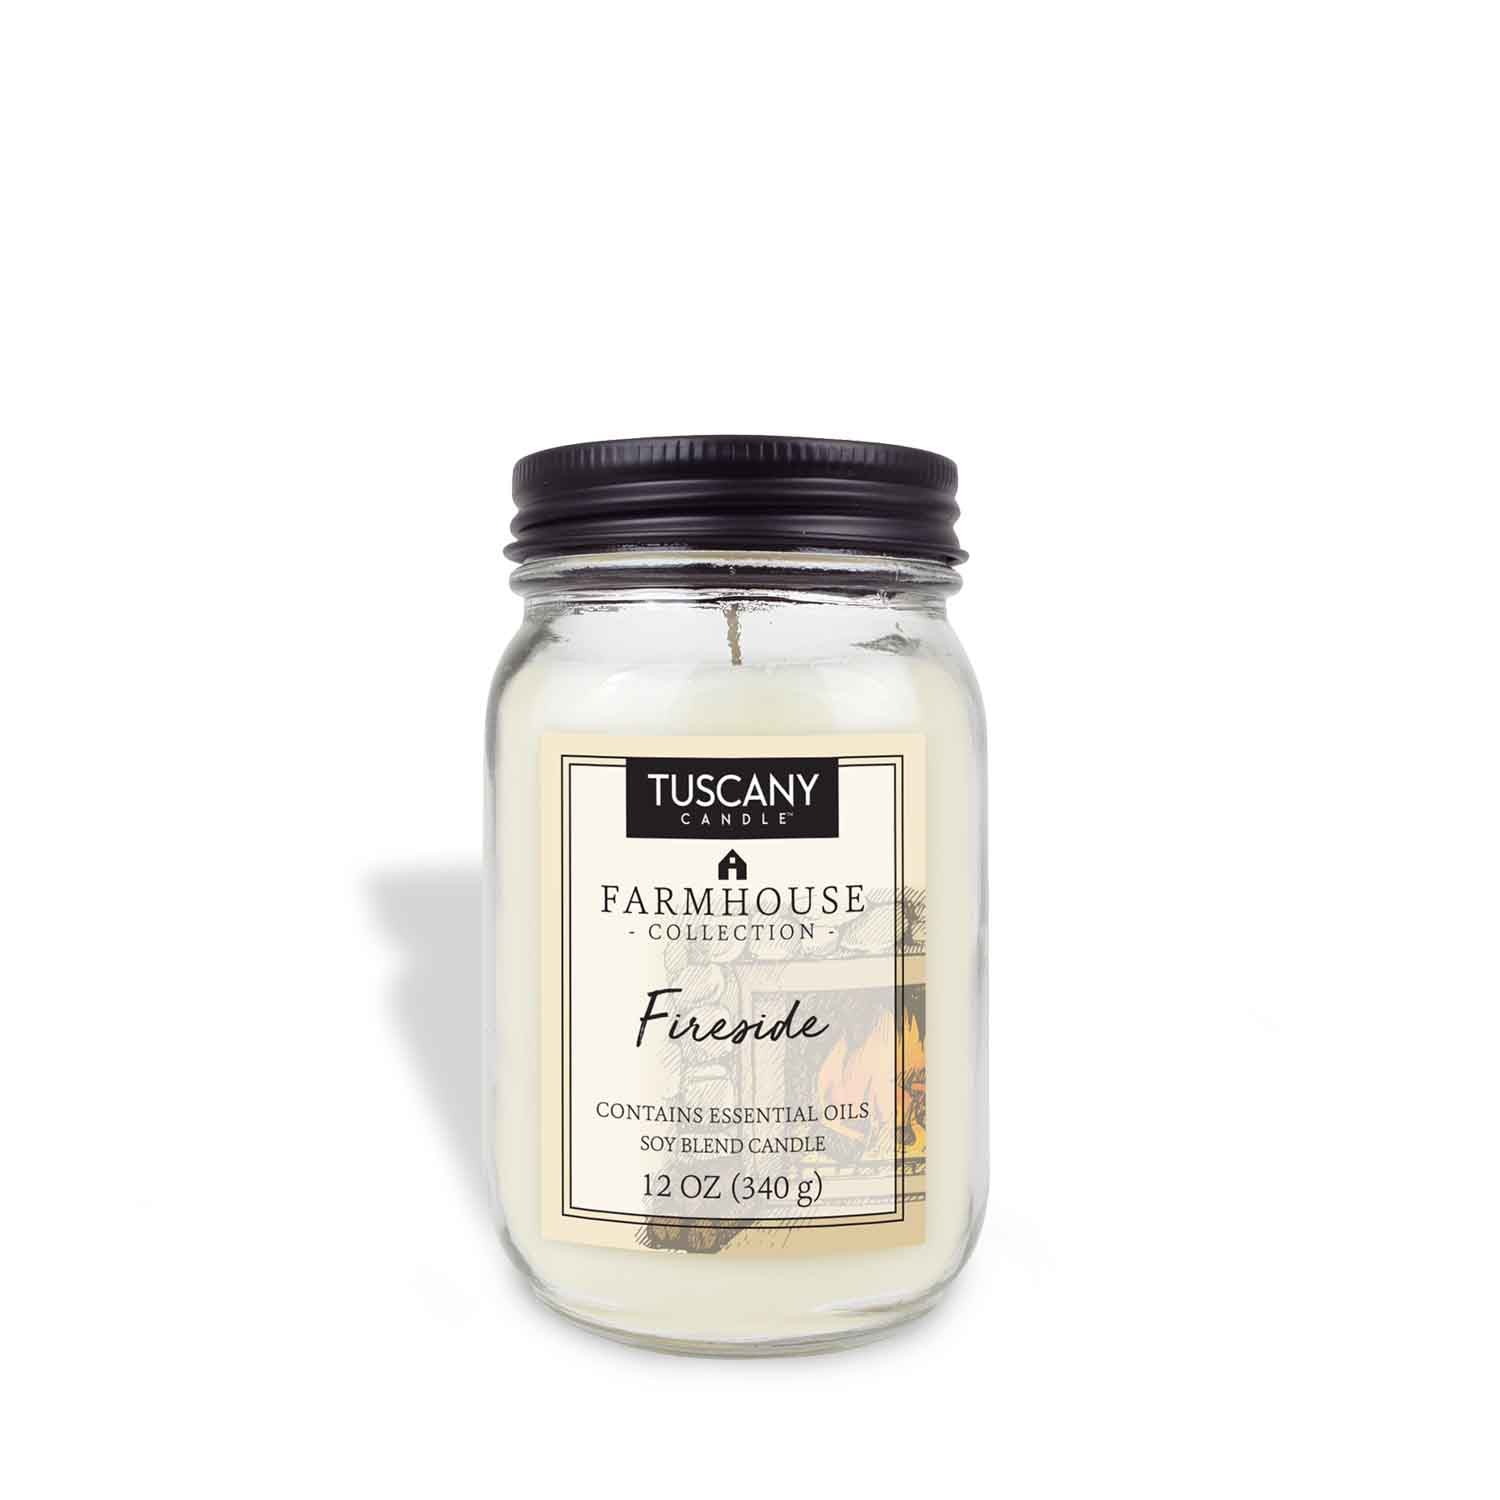 A Fireside Scented Jar Candle (12 oz) from Tuscany Candle, with a rustic touch, displayed against a white background as part of the Farmhouse Collection.